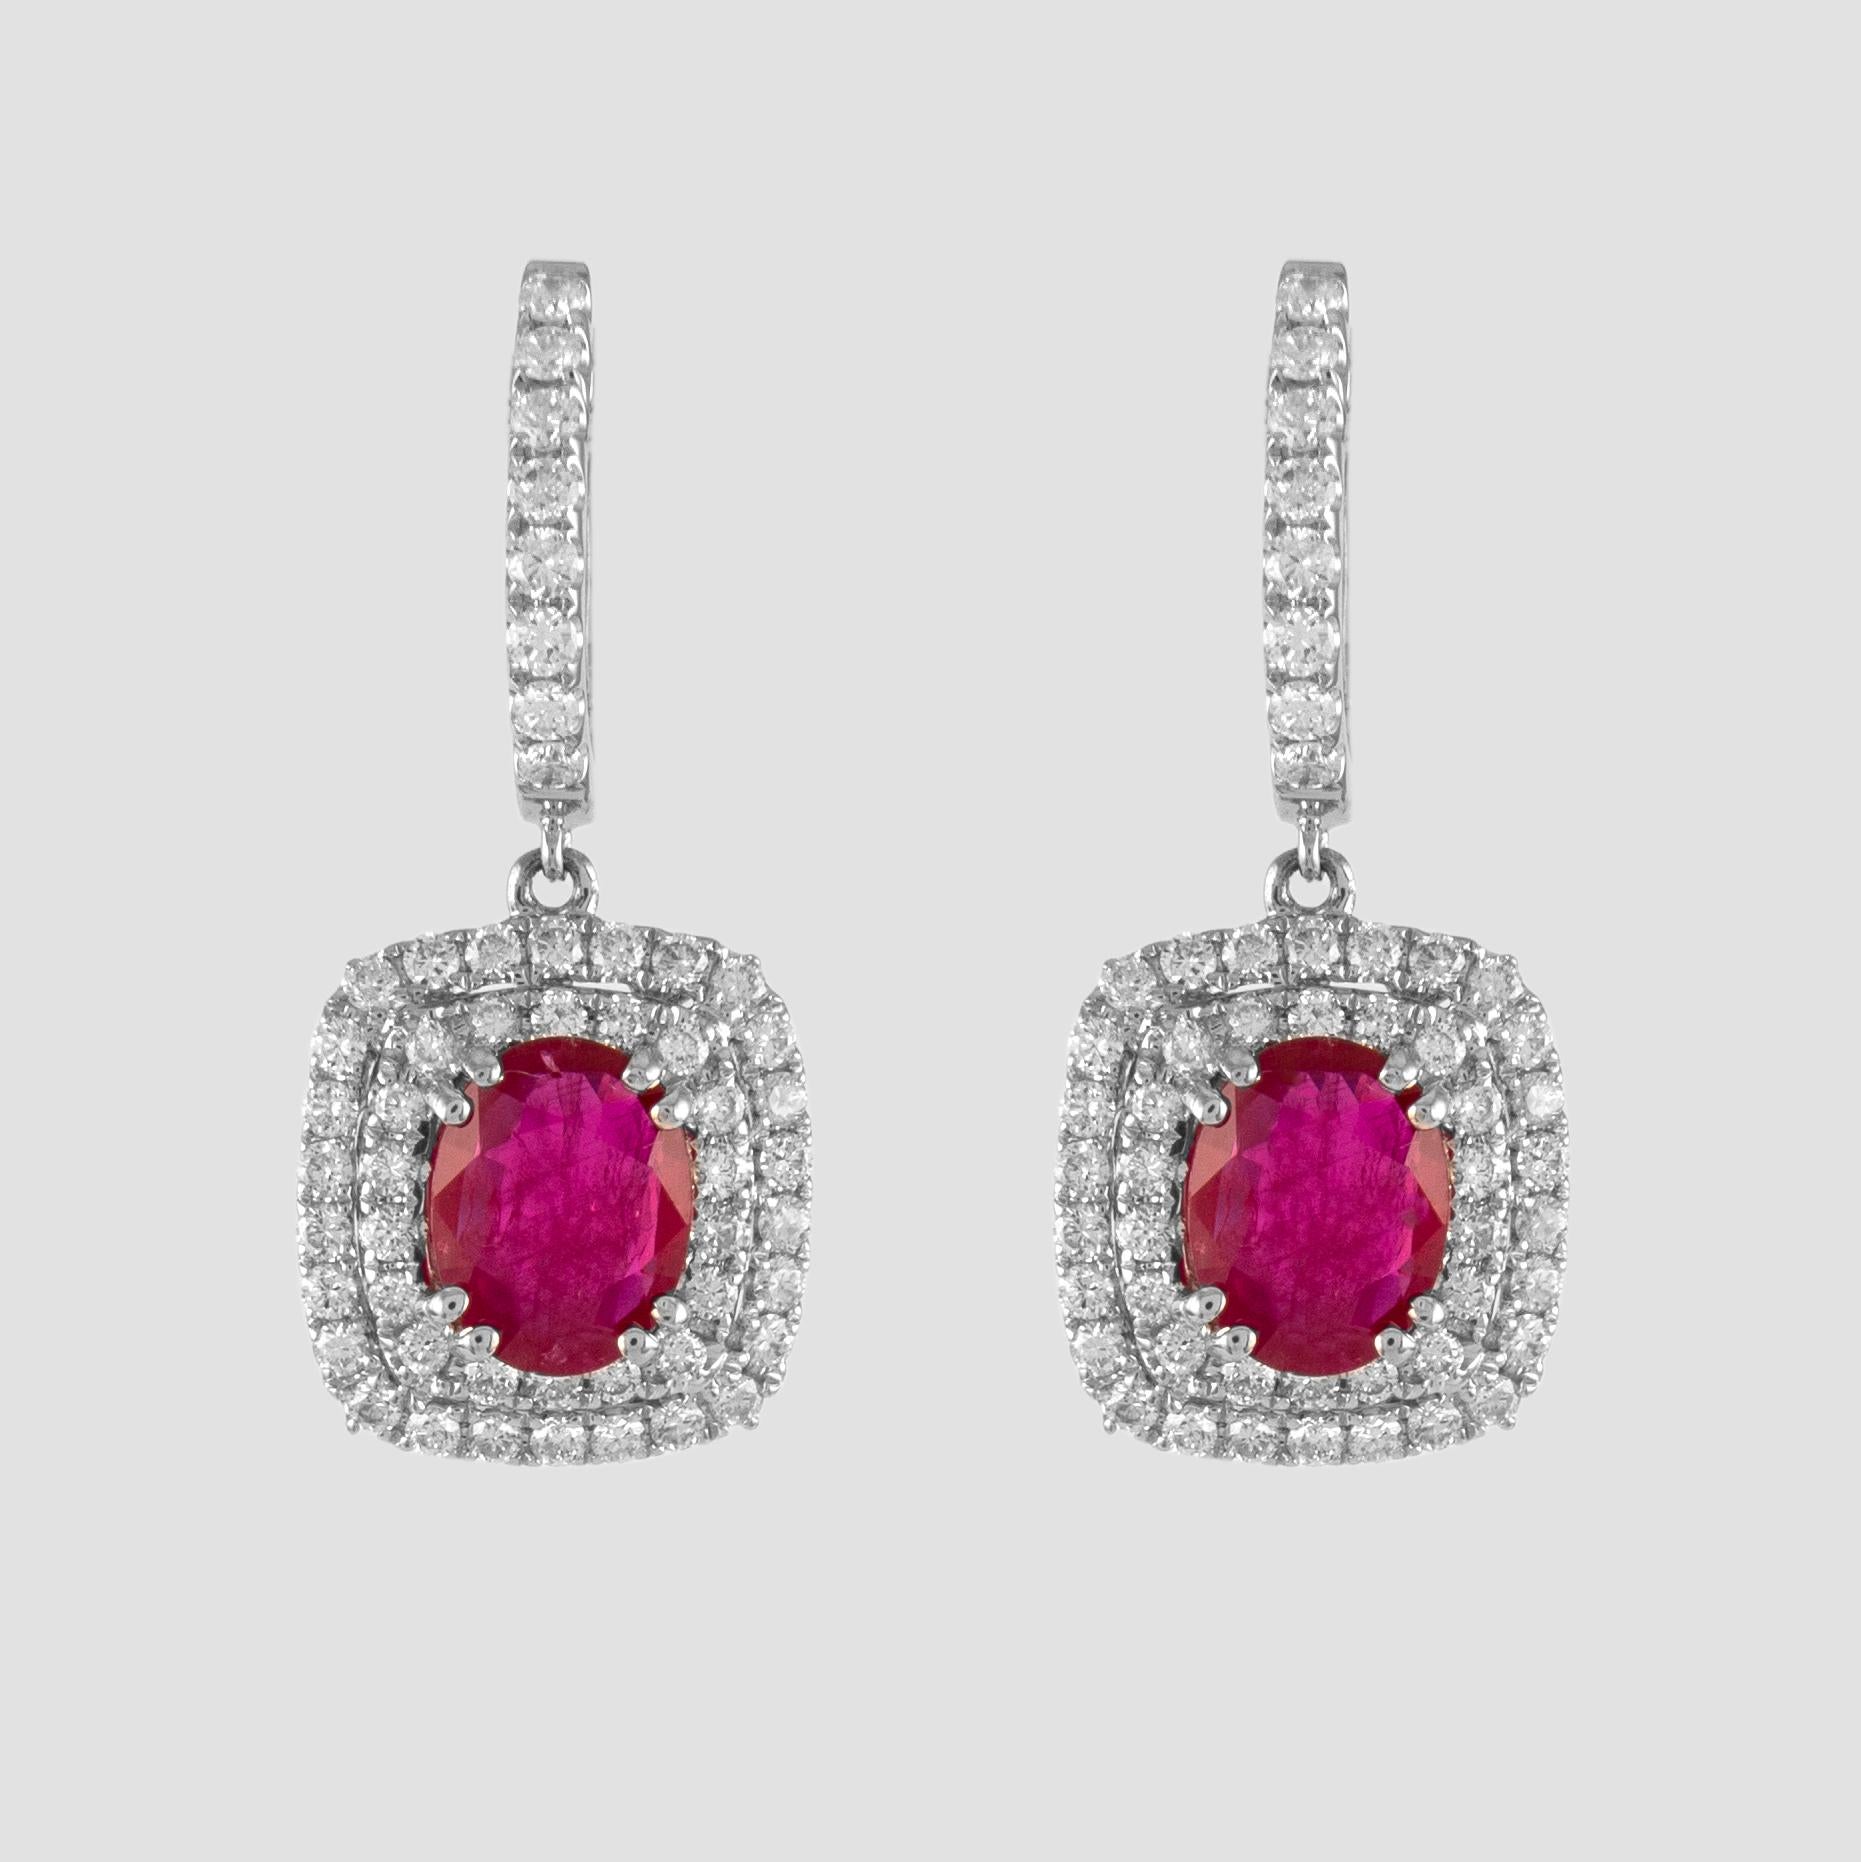 Oval Cut 2.48ct Oval Ruby with Double Diamond Halo Drop Earrings 18k White Gold 